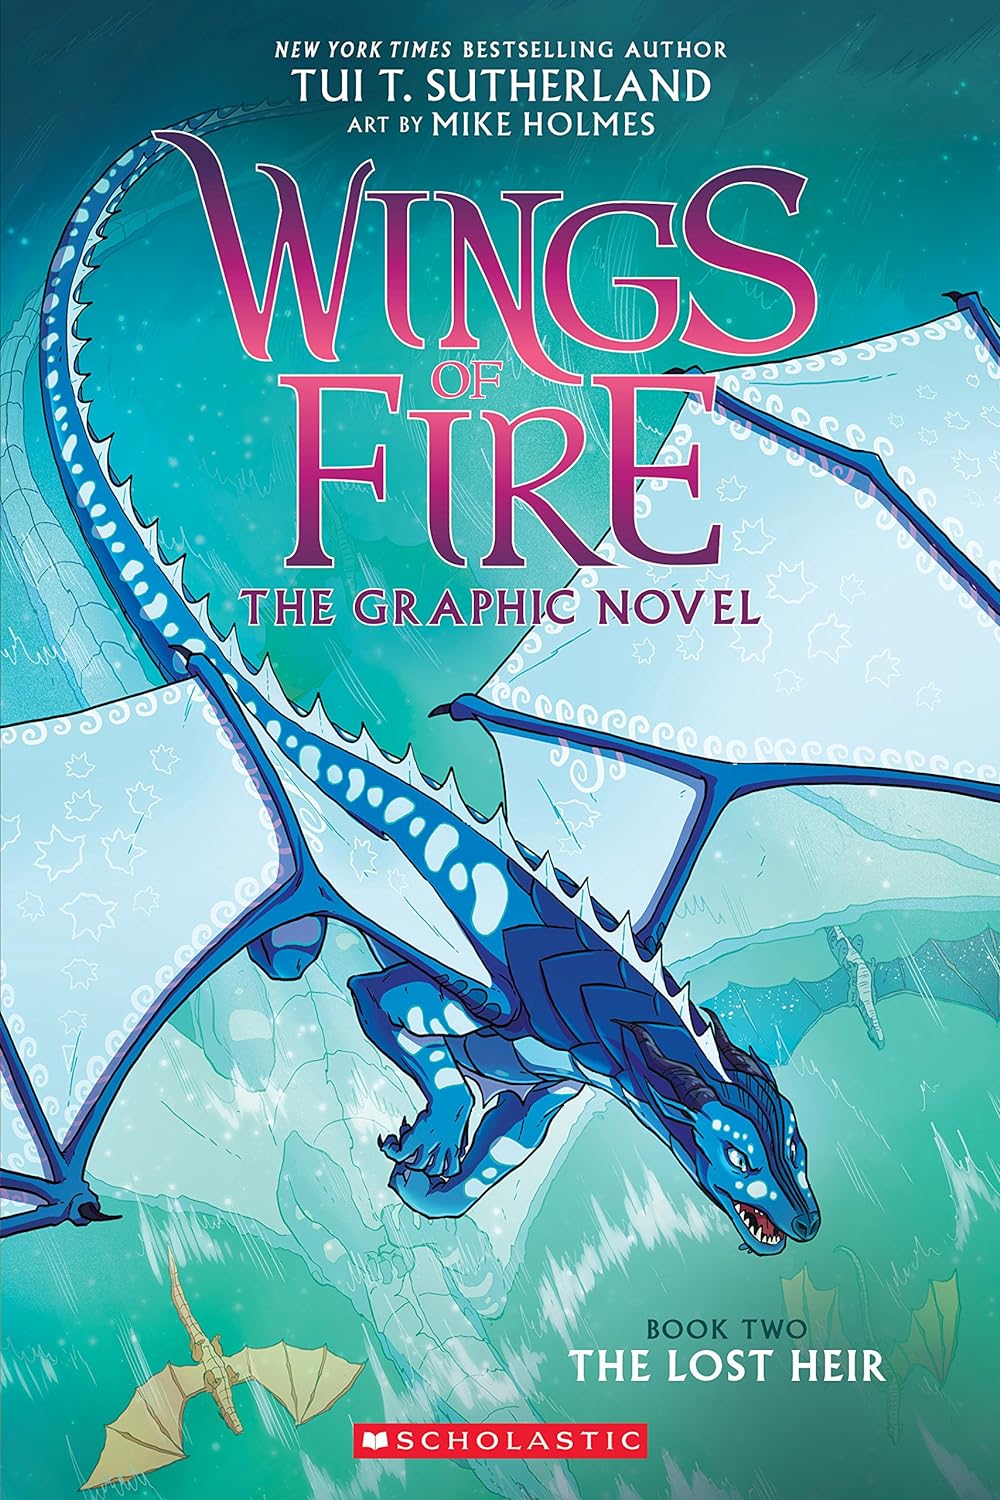 Wings of fire : the graphic novel. Book 2, The lost heir 책표지